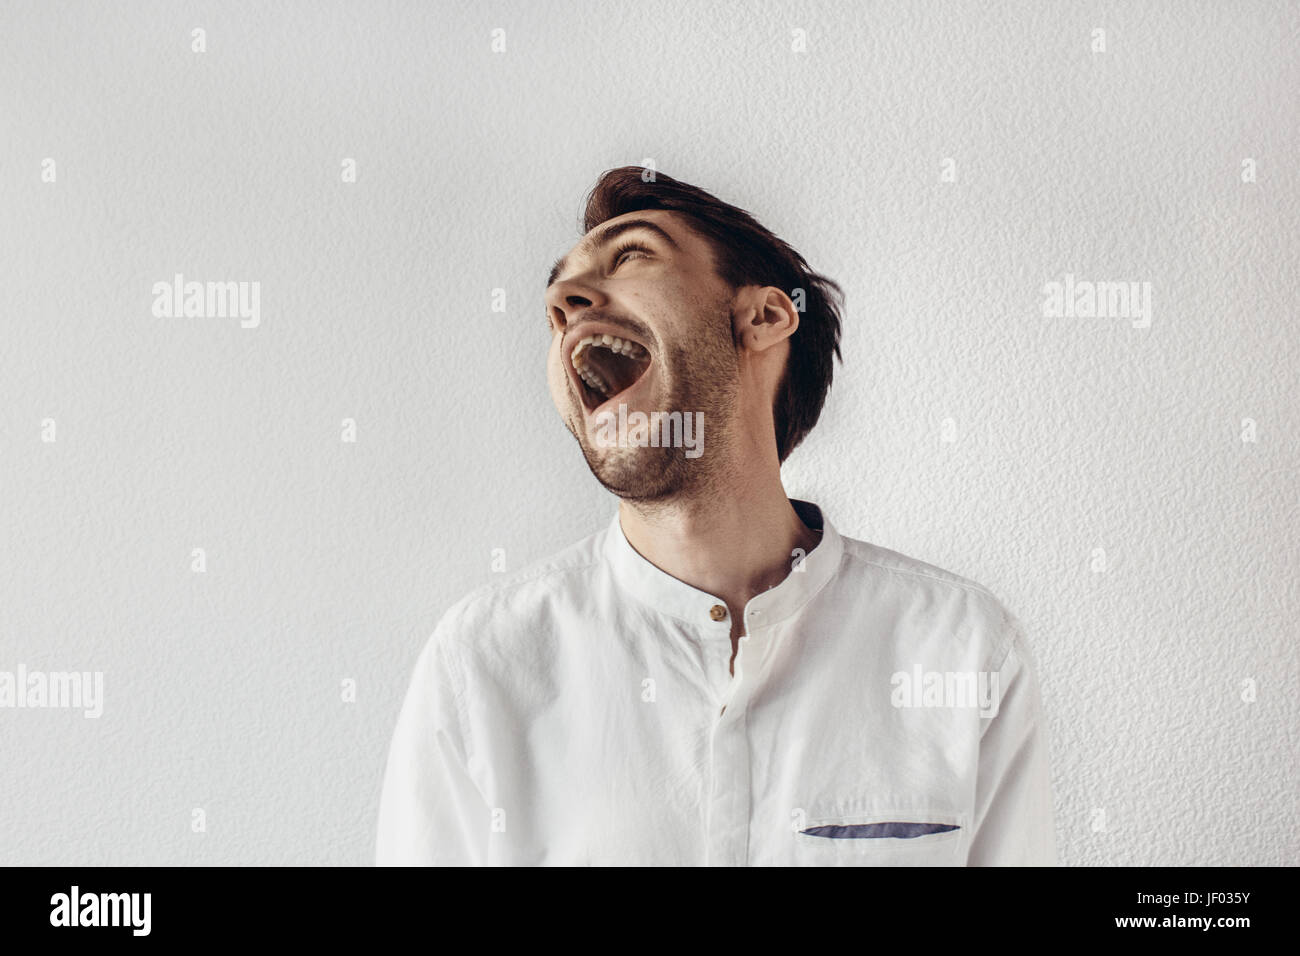 Man standing and yelling with an open mouth Stock Photo